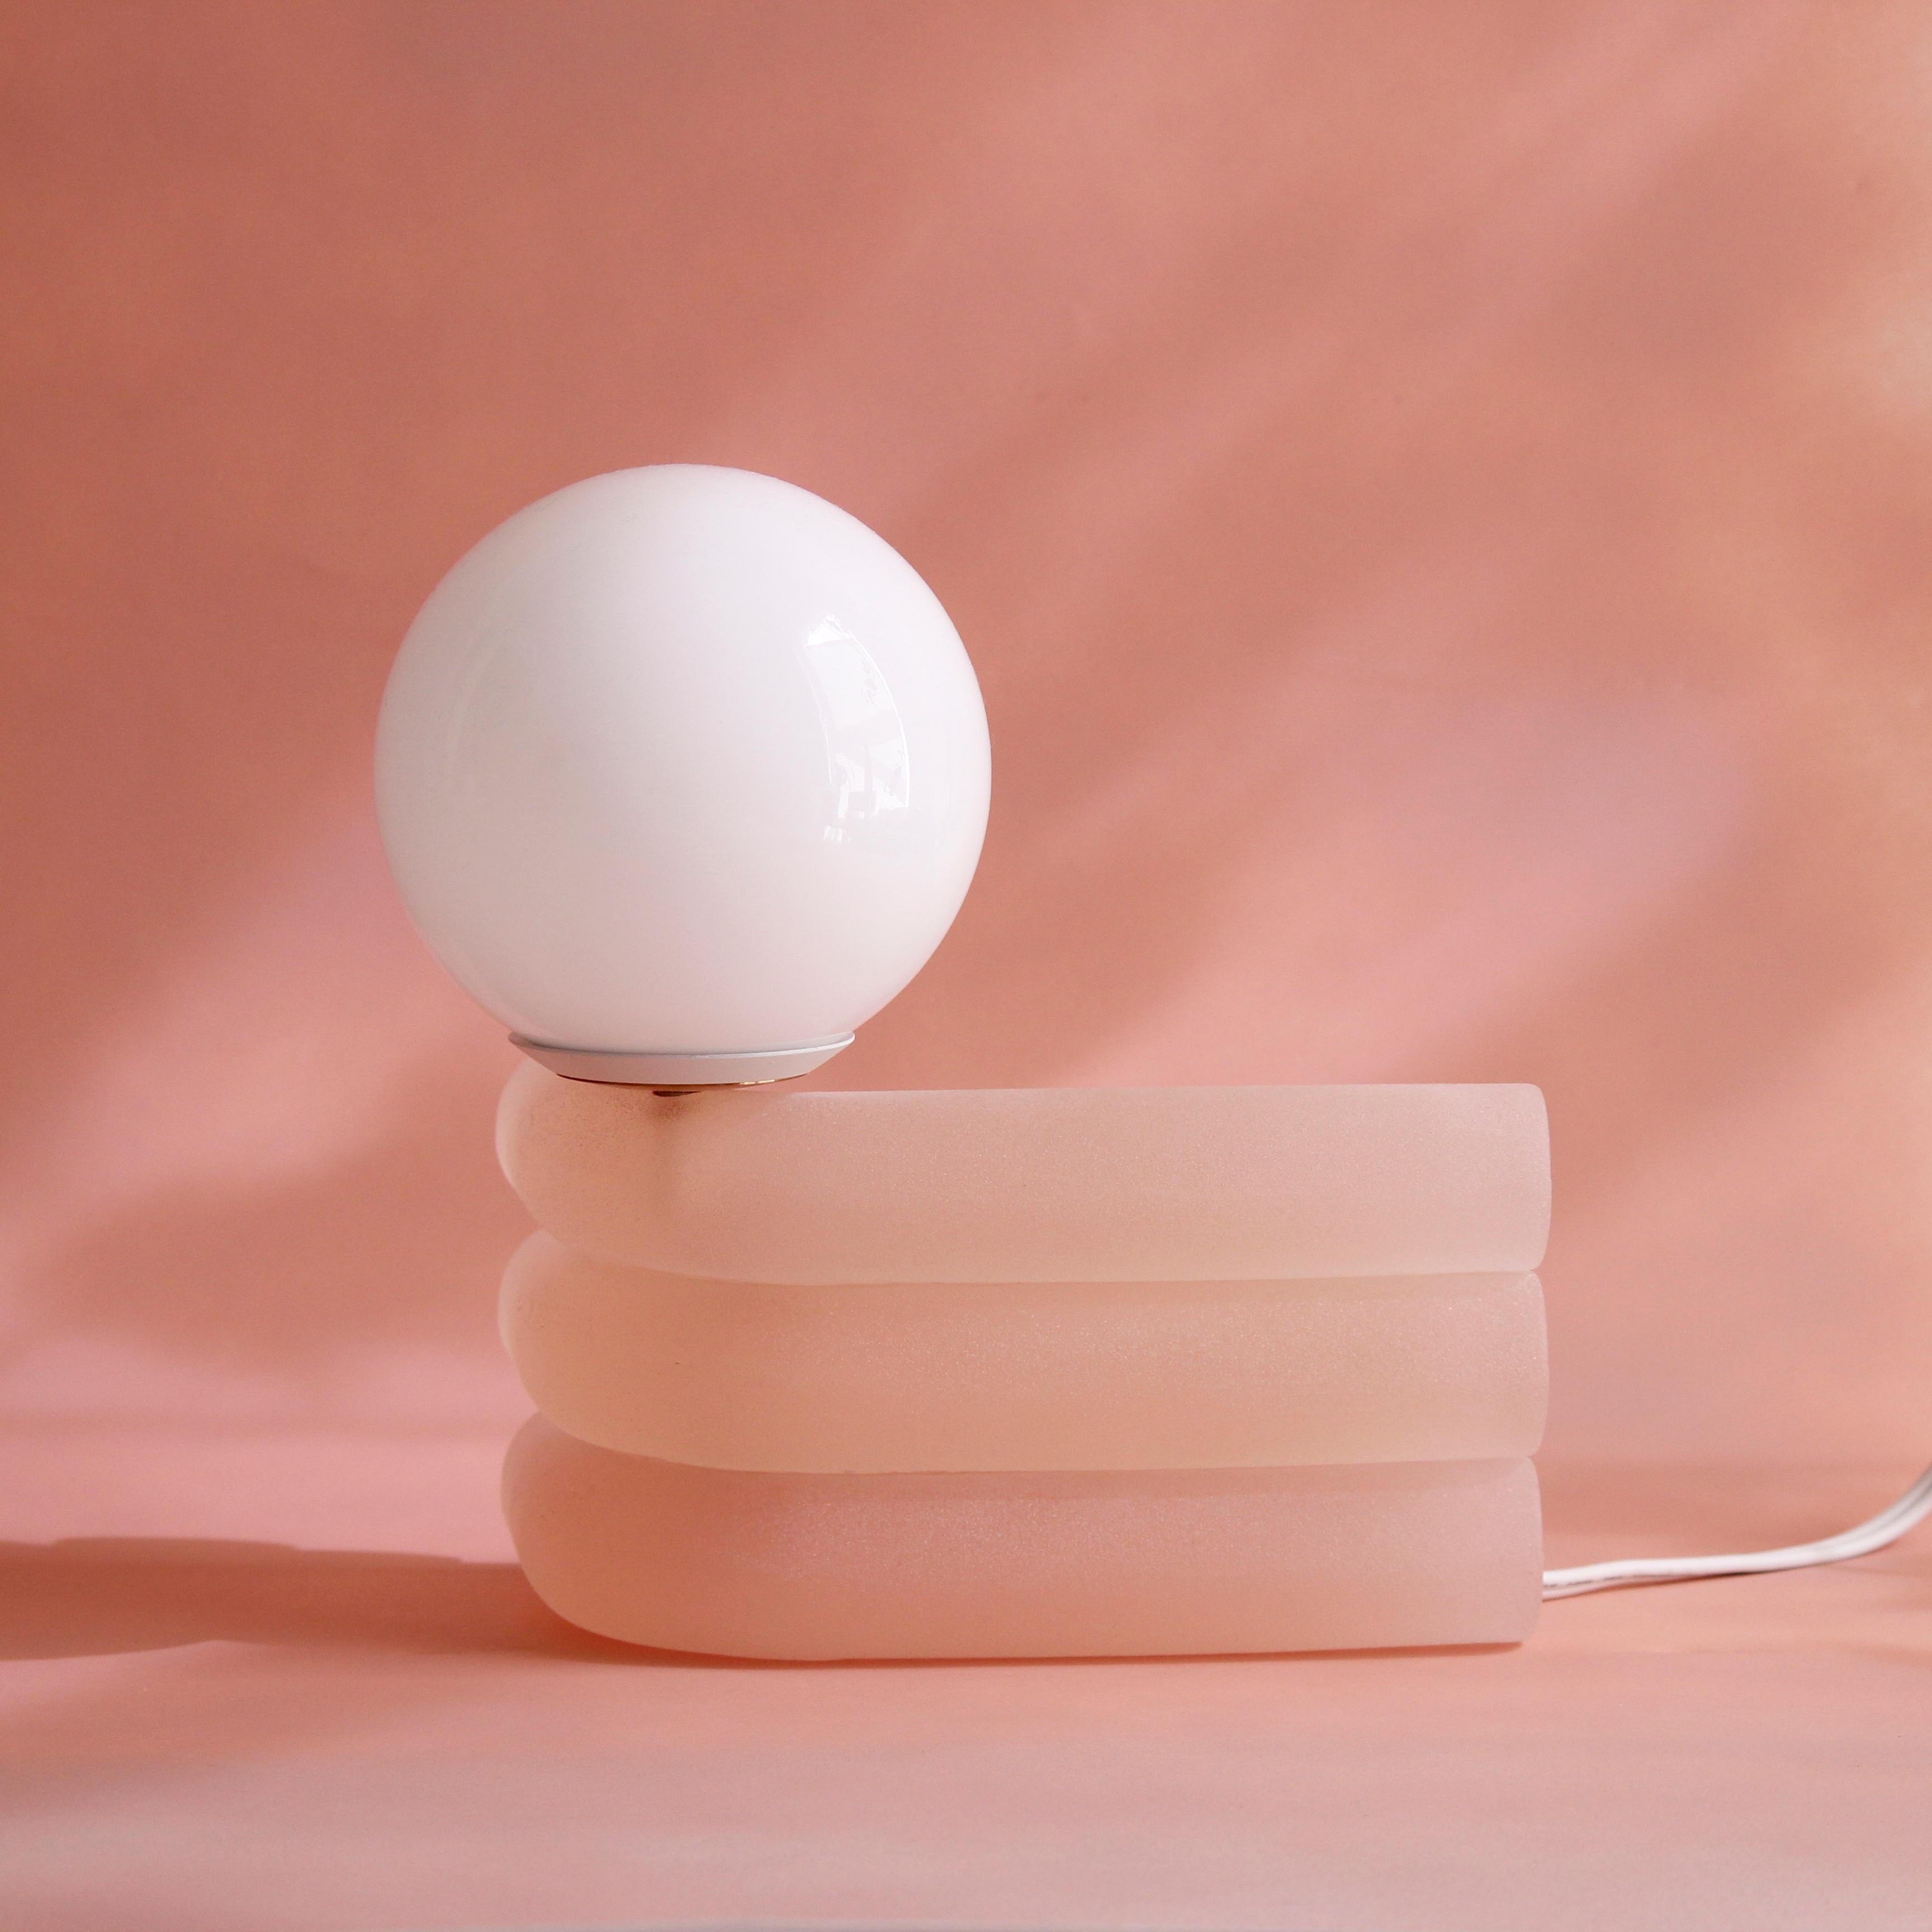 Lychee small Elio lamp by Soft-geometry
Materials: Voice-controlled smart lamp, hand-cast in textured resin
Dimensions: 11” x 7” x 9” H
Voice-controlled smart lamp

Inspired by an informal photo series documenting the play of light on glass,